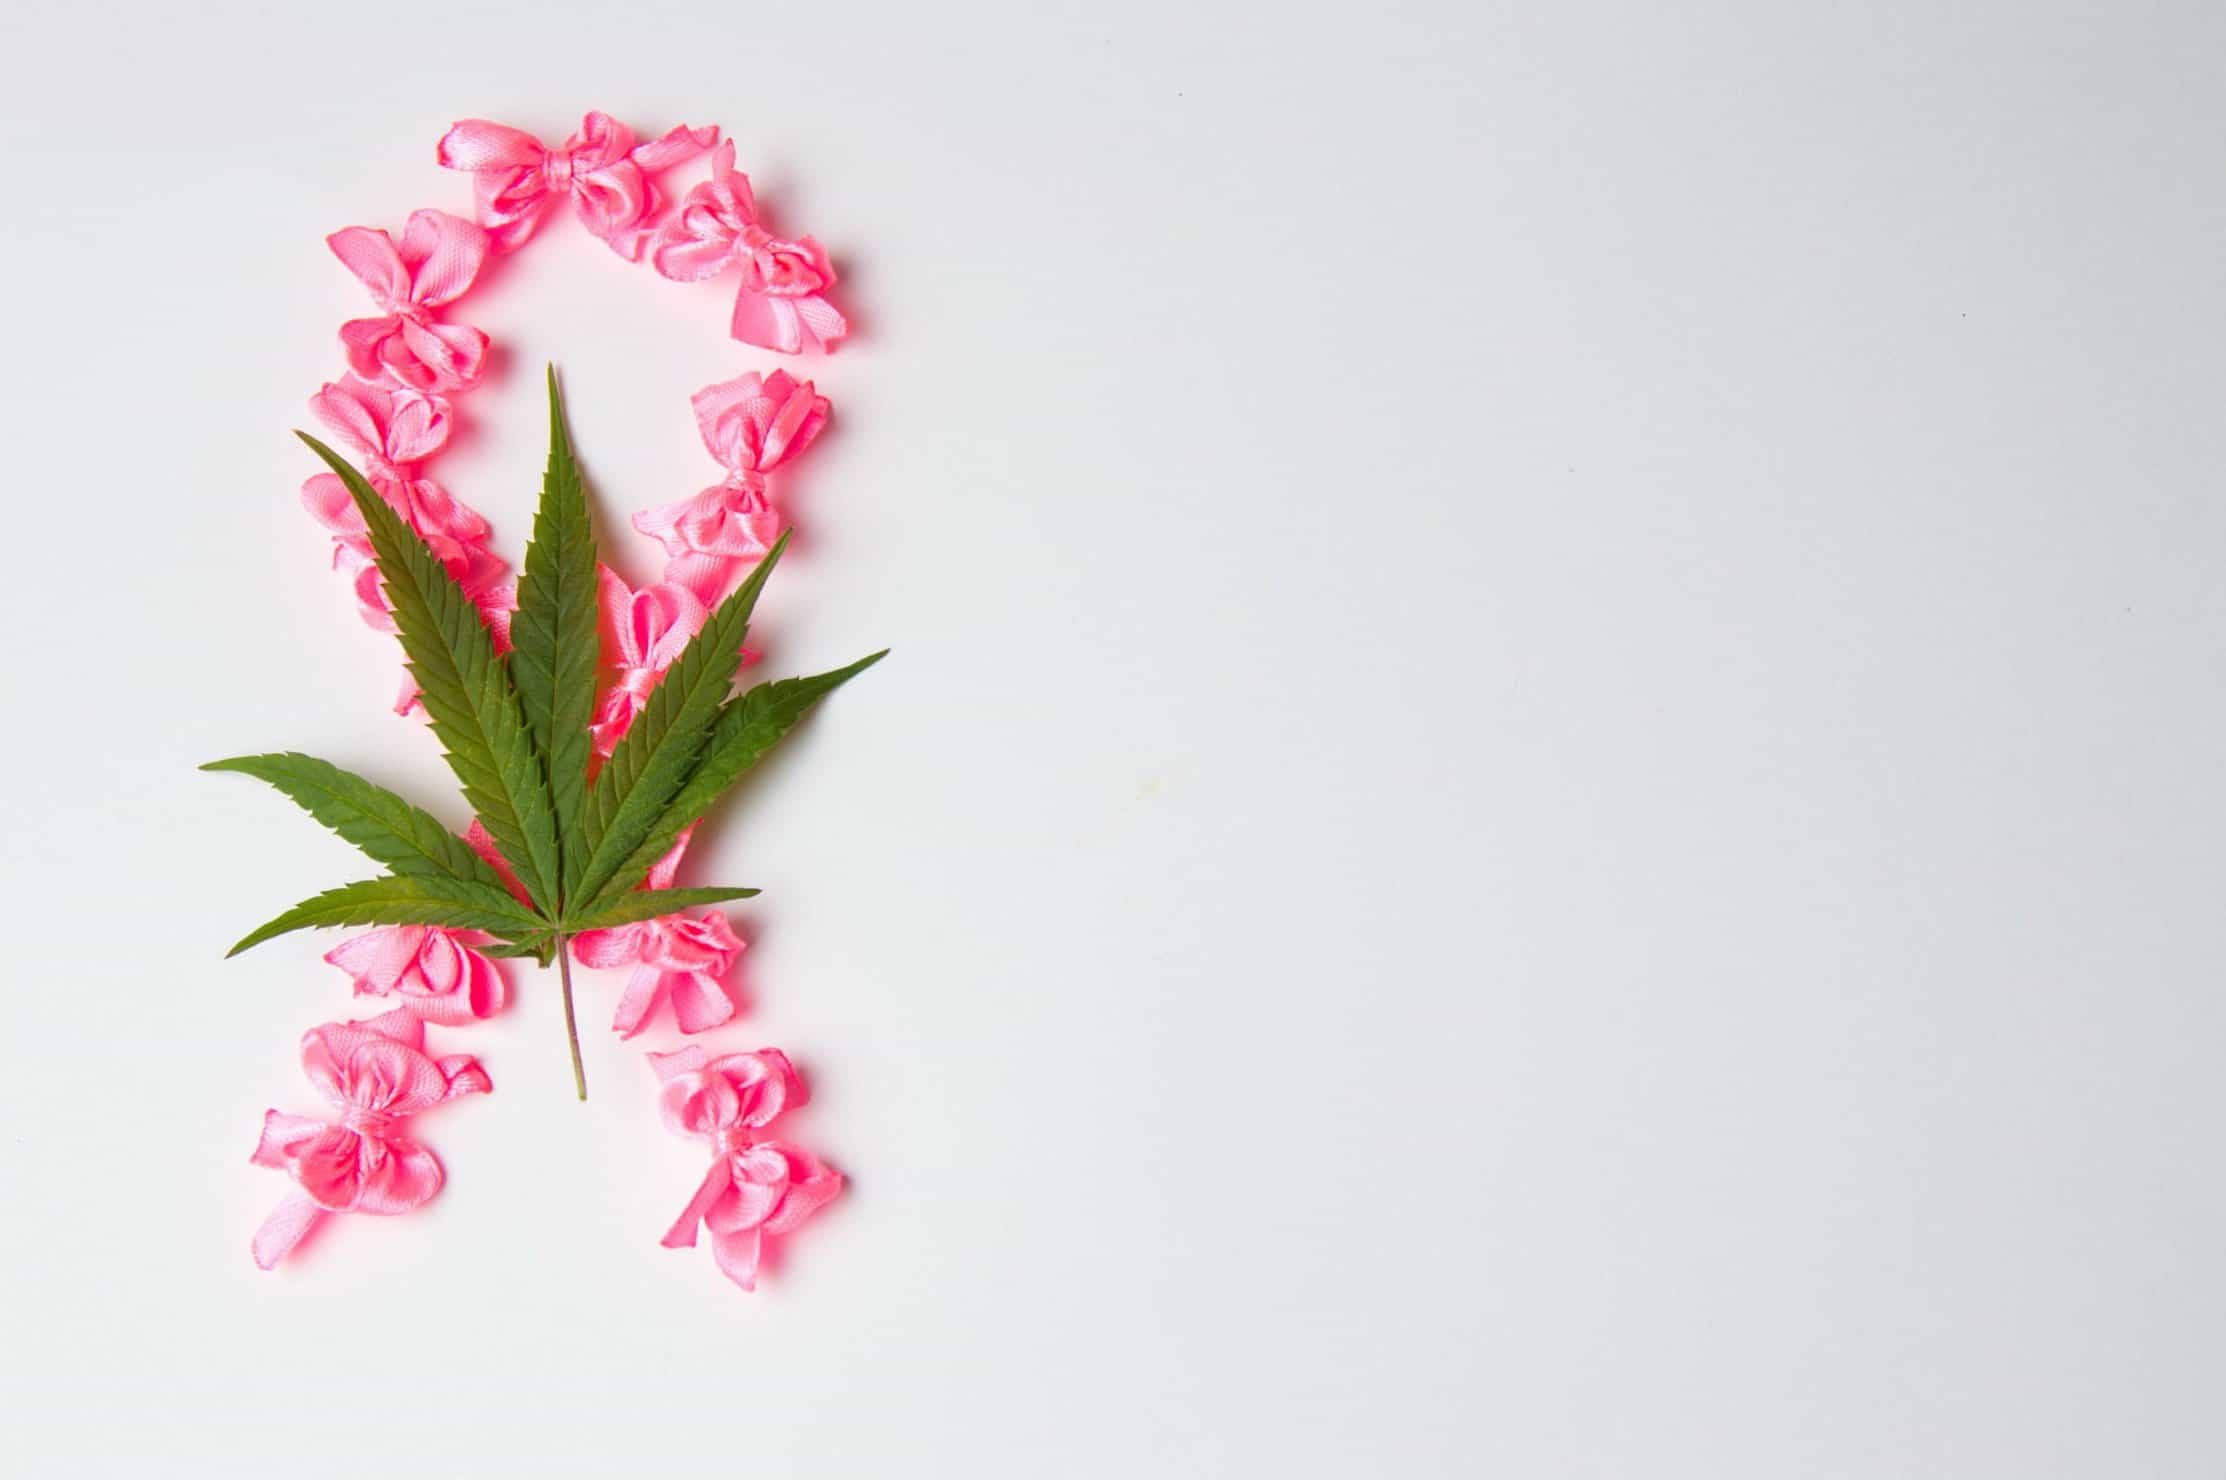 Cannabis Treatment for Breast Cancer: What To Know